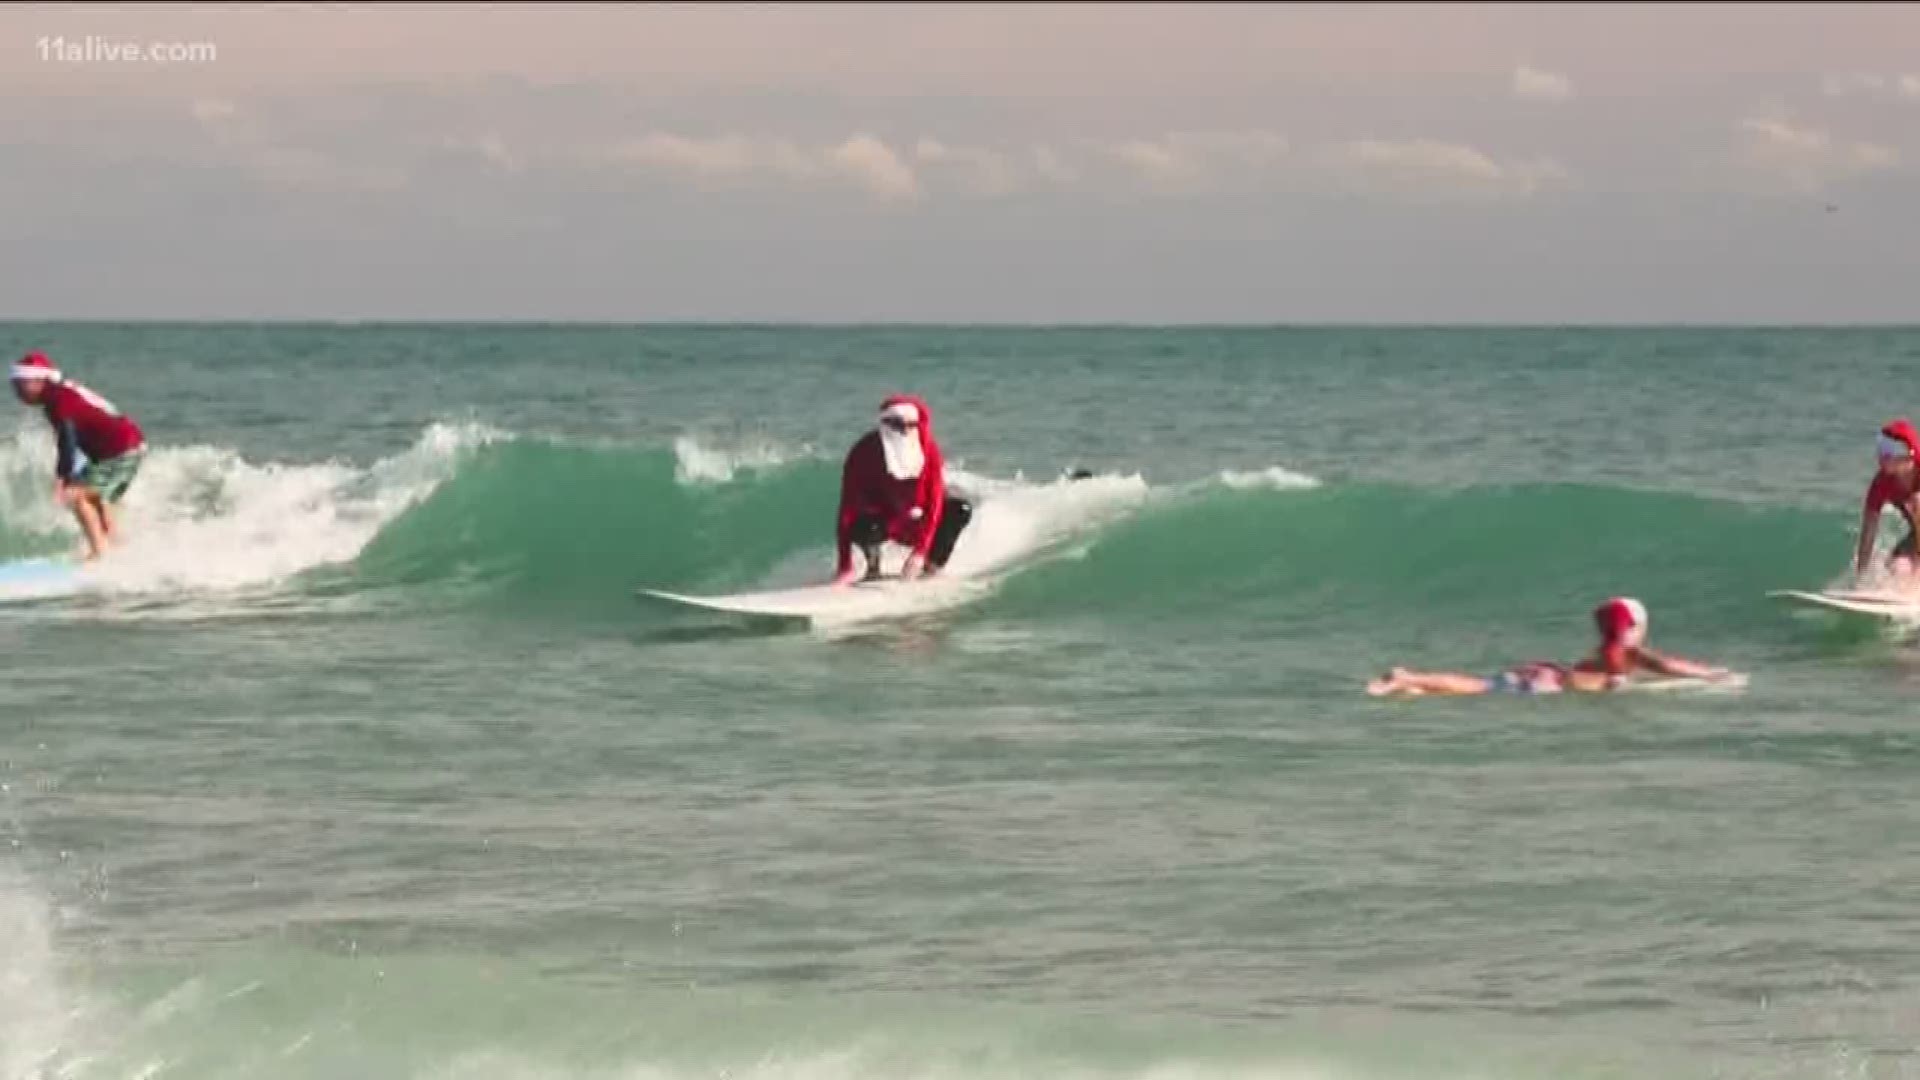 This year, this group of Surfing Santa's collected more than $60,000.